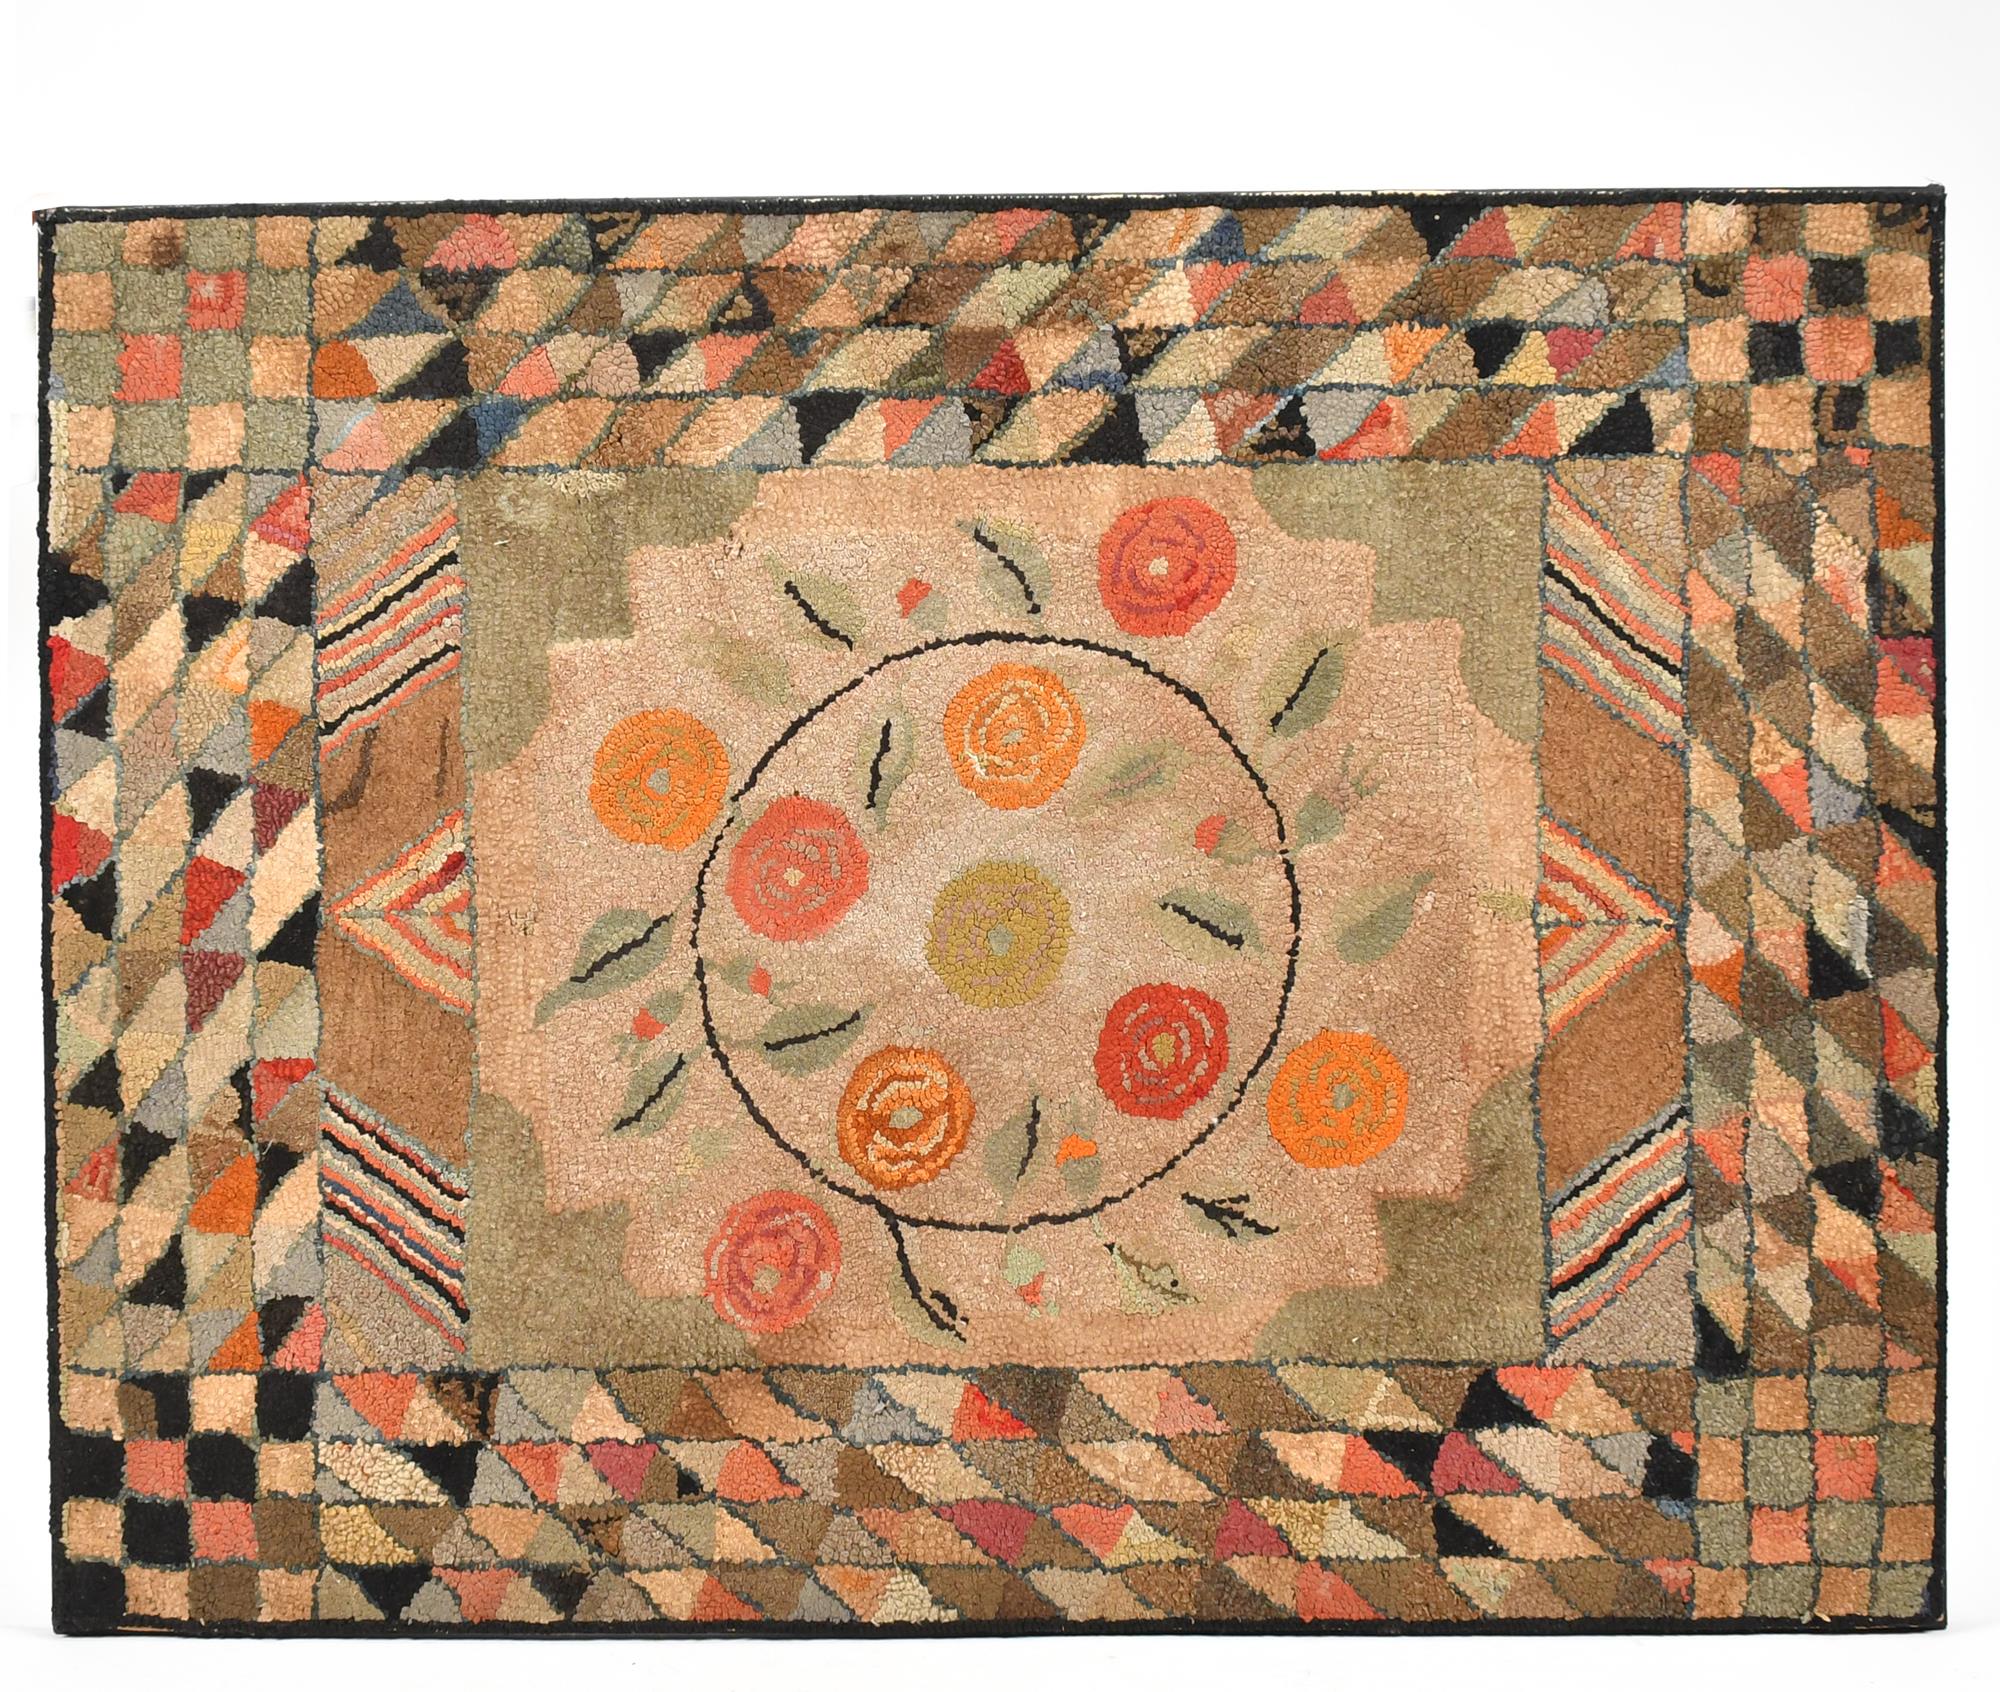 COLORFUL 19TH C. HOOKED RUG. 19th